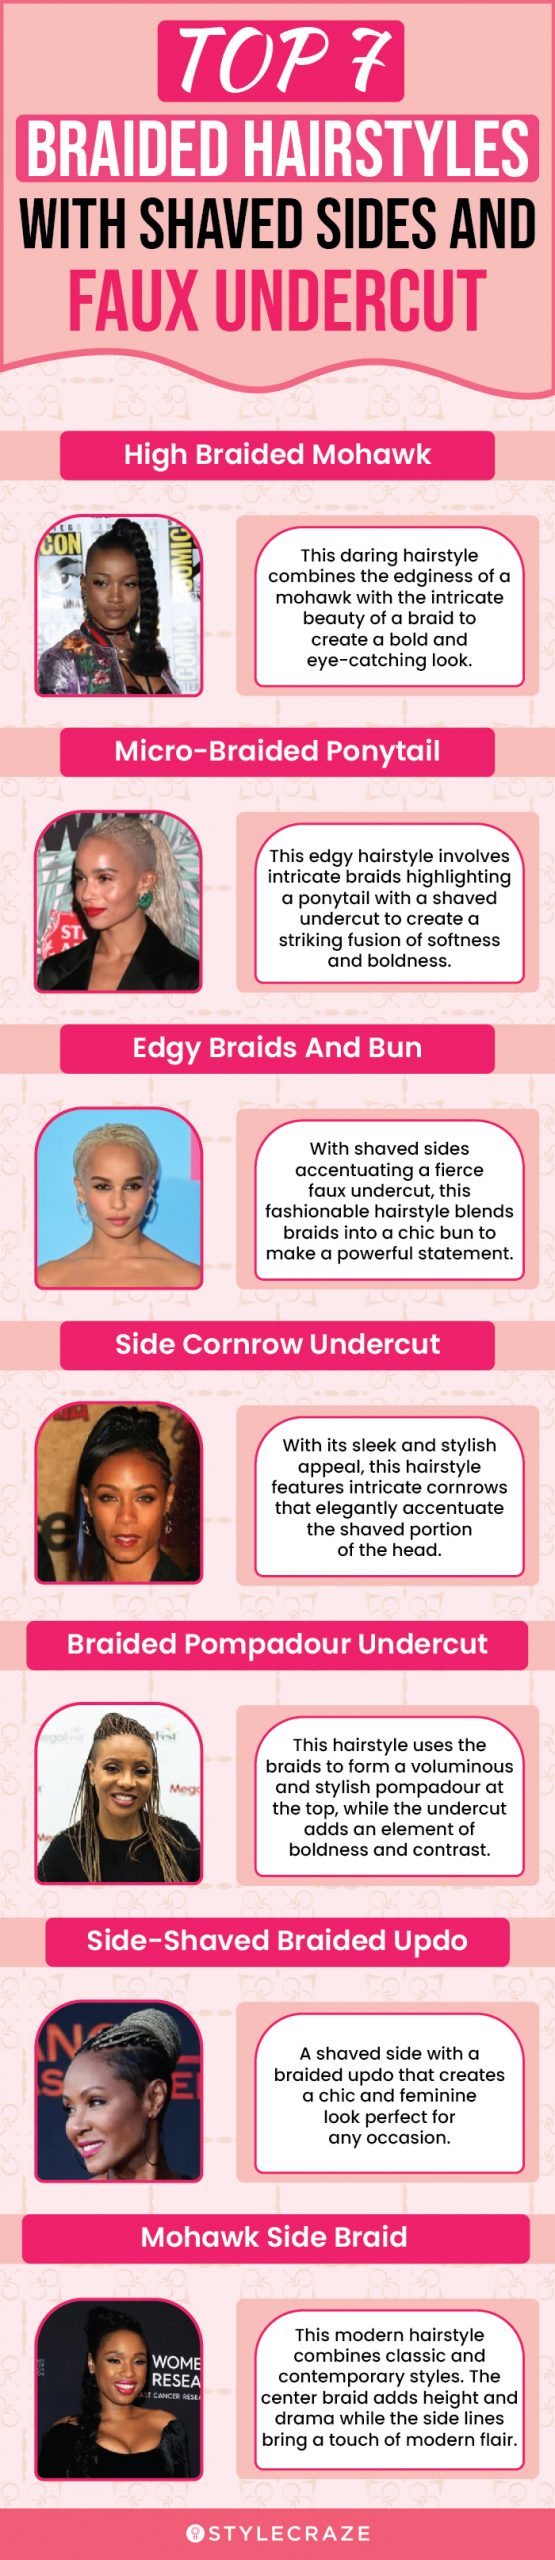 top 7 braided hairstyles with shaved sides and faux undercut (infographic)